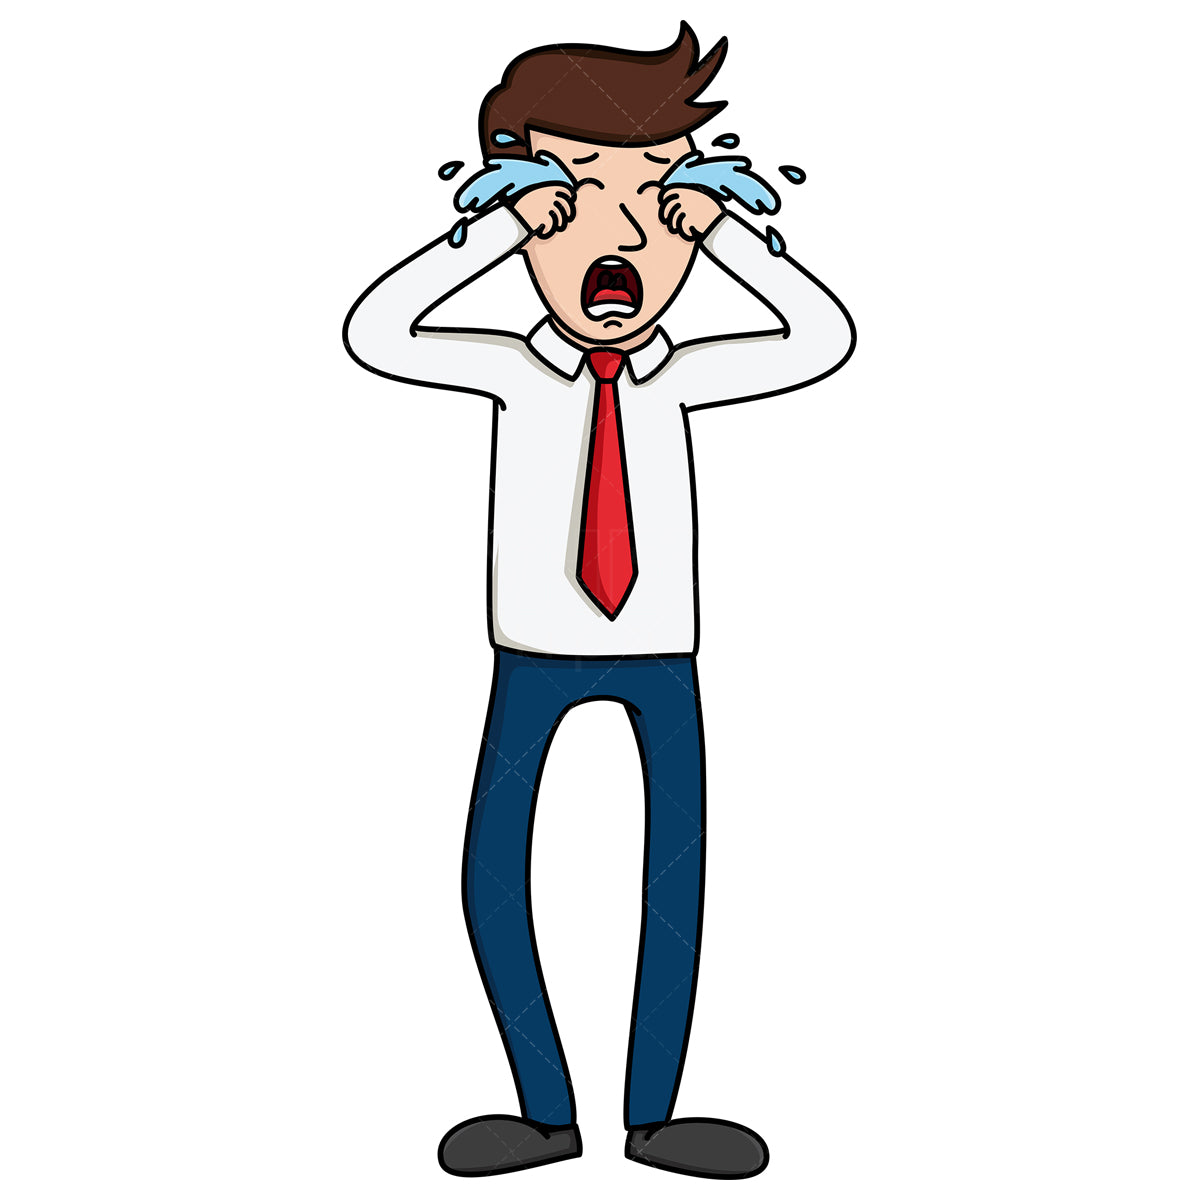 Royalty-free stock vector illustration of a bawling business man.